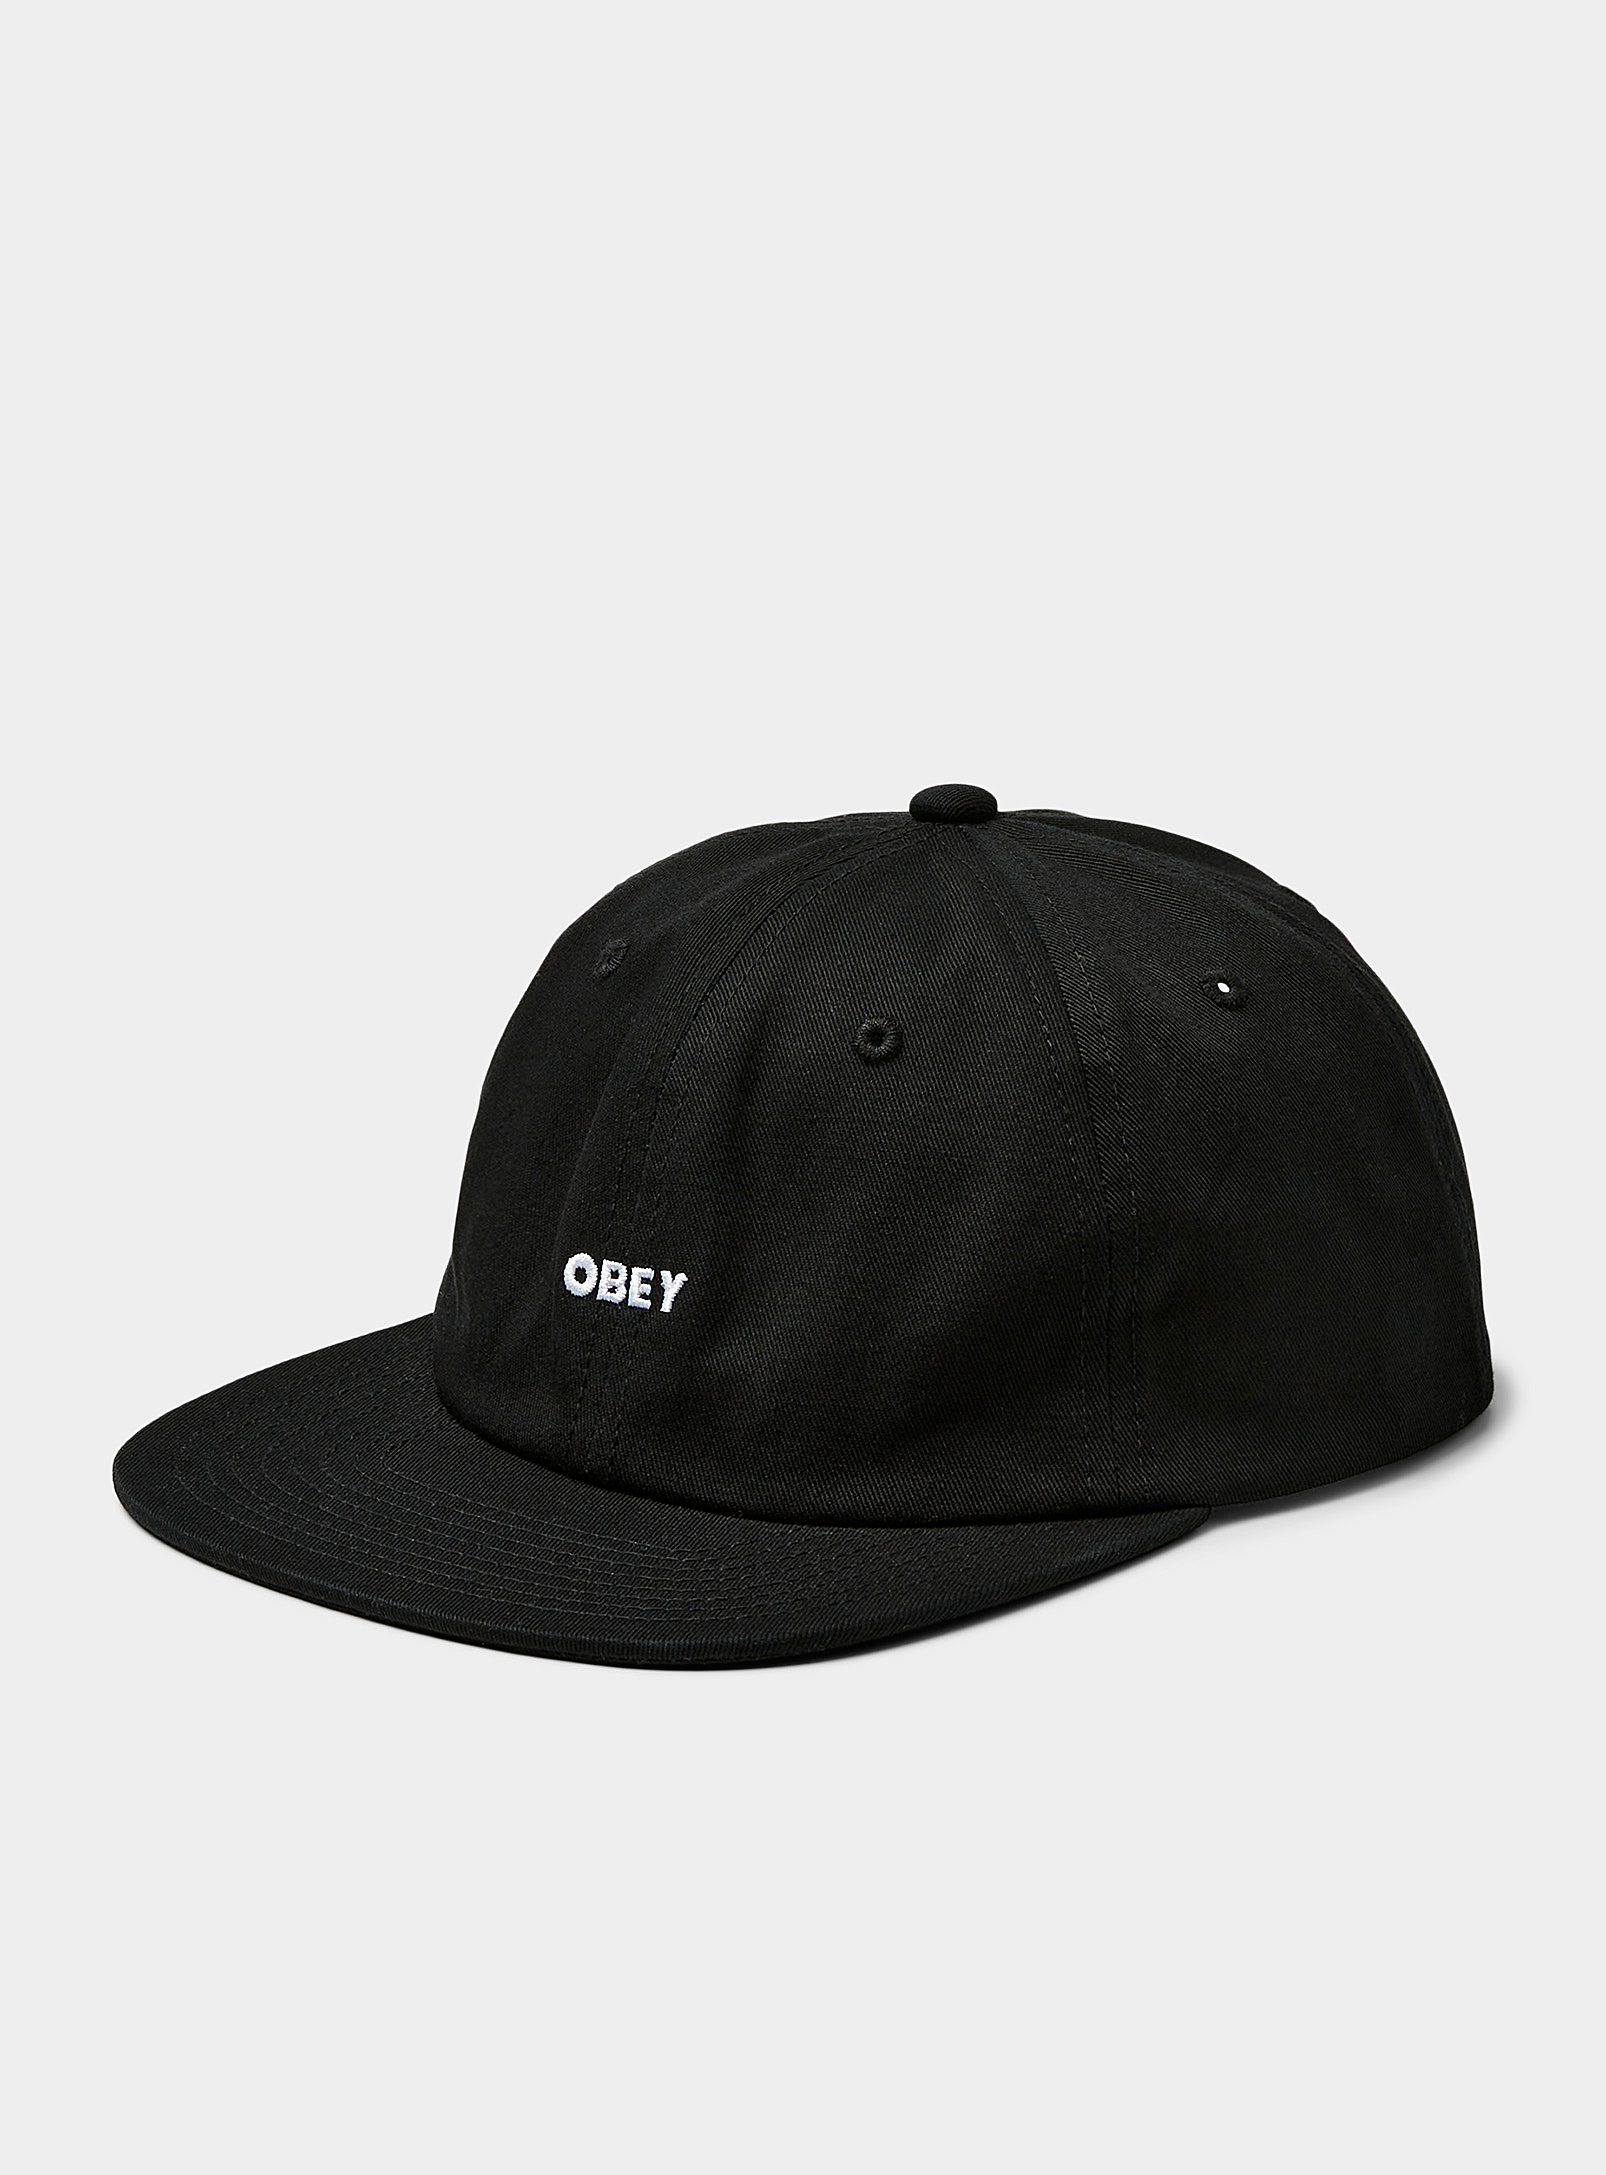 Obey - Men's Small embroidered logo cap